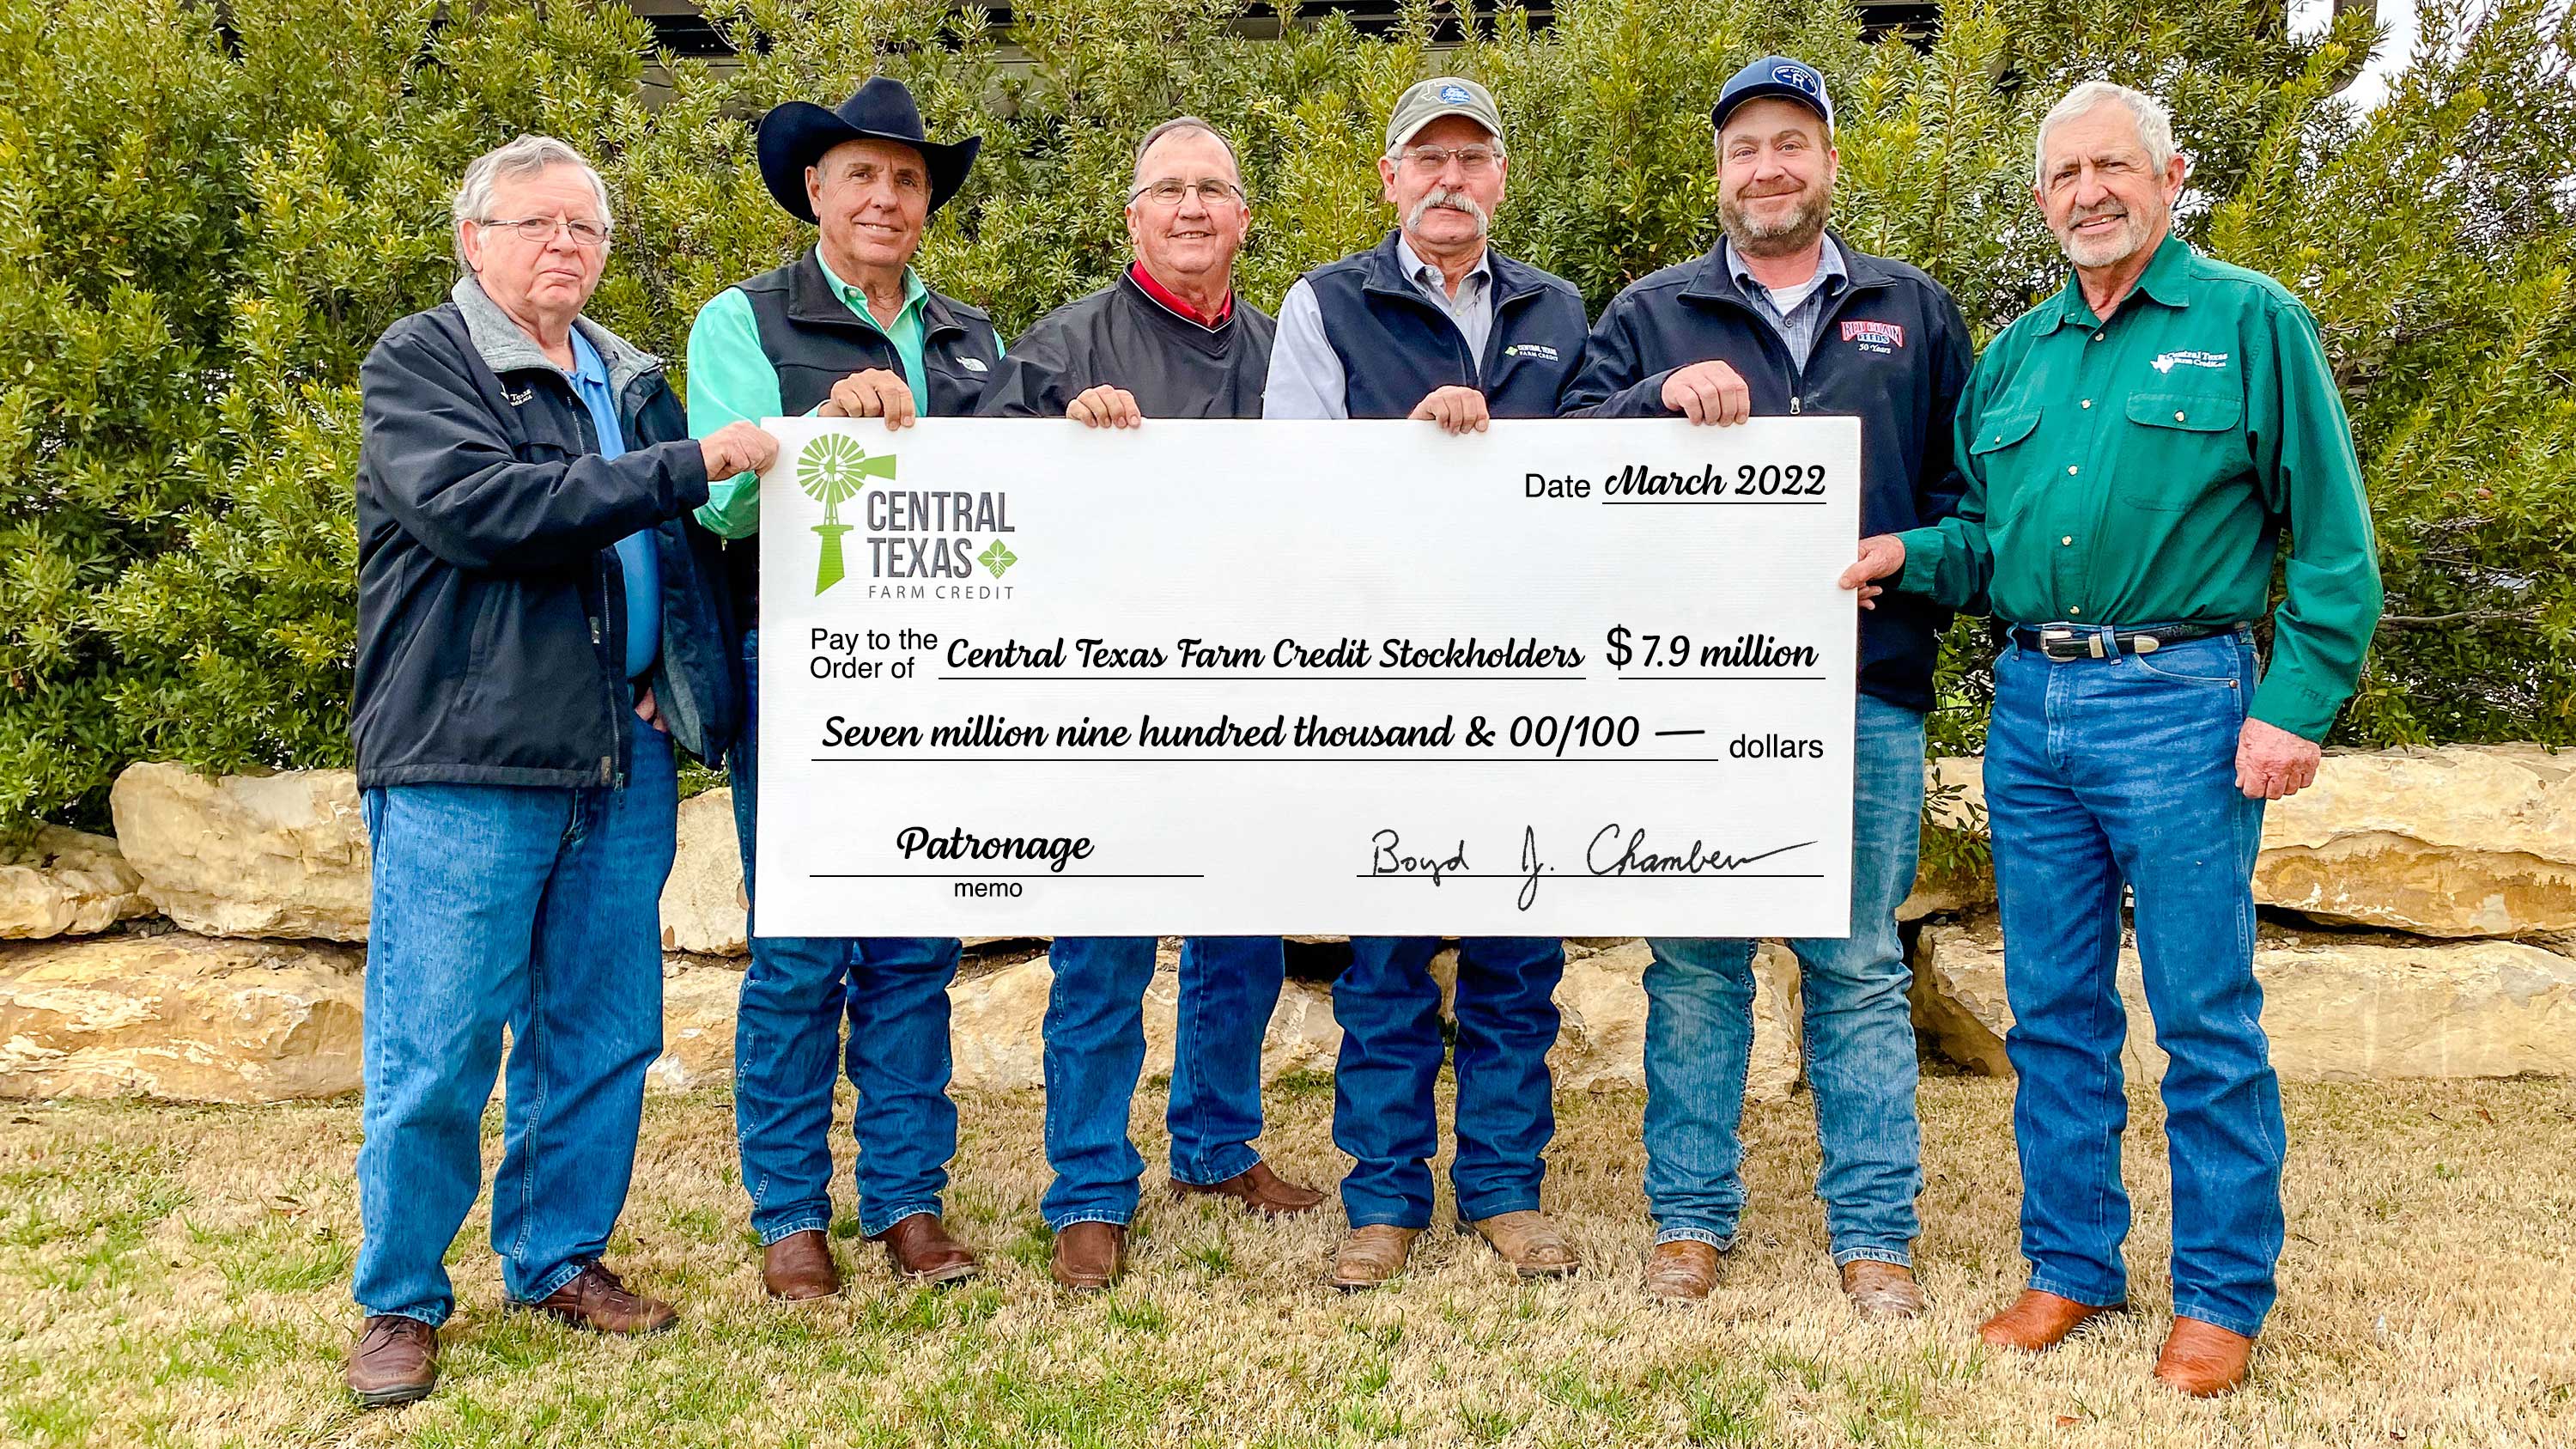 Central Texas Farm Credit Board of Directors, left to right, Burl Lowery, member; Kenneth Harvick, vice-chairman; Steven Lehrmann, member; Philip Hinds, member; Robby Halfmann, chairman; and Mike Finlay, member.